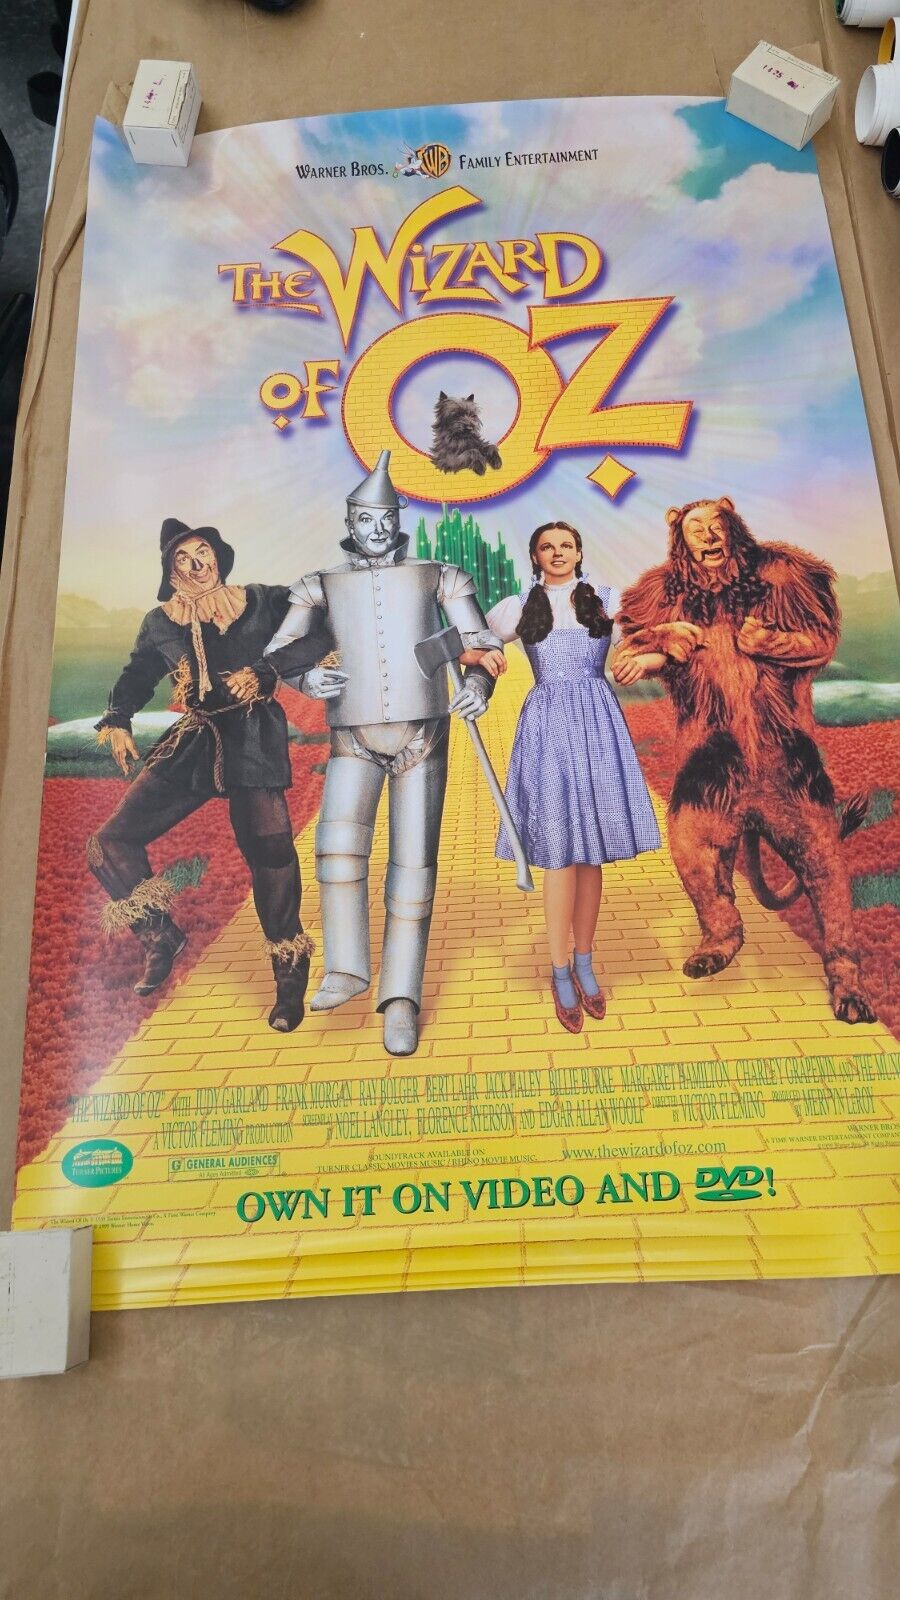 The Wizard of Oz DVD promotional movie poster